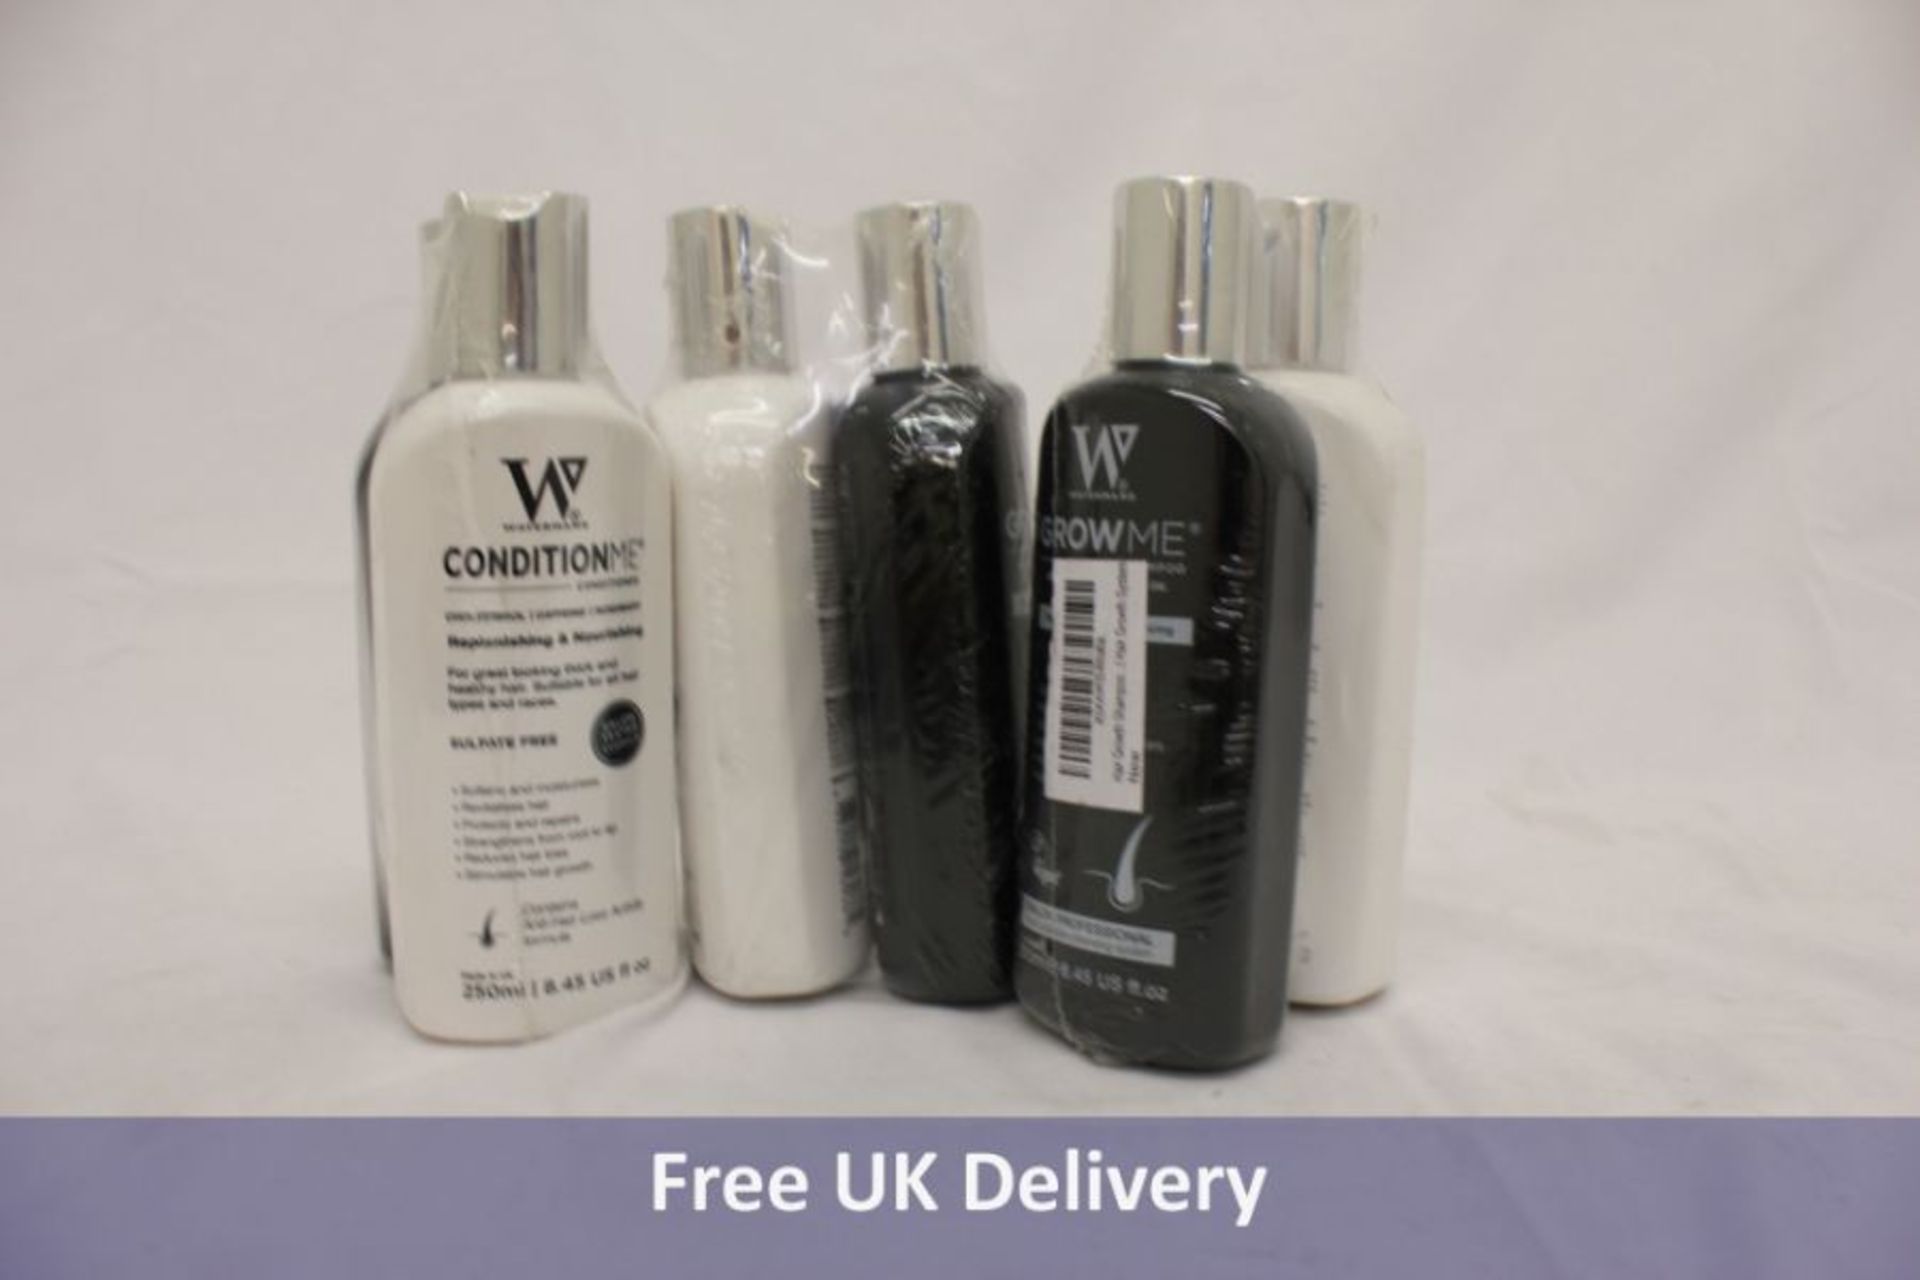 Nineteen Hair Growth Shampoo and Conditioner by Watermans UK Male and Female Hair Loss Products, wit